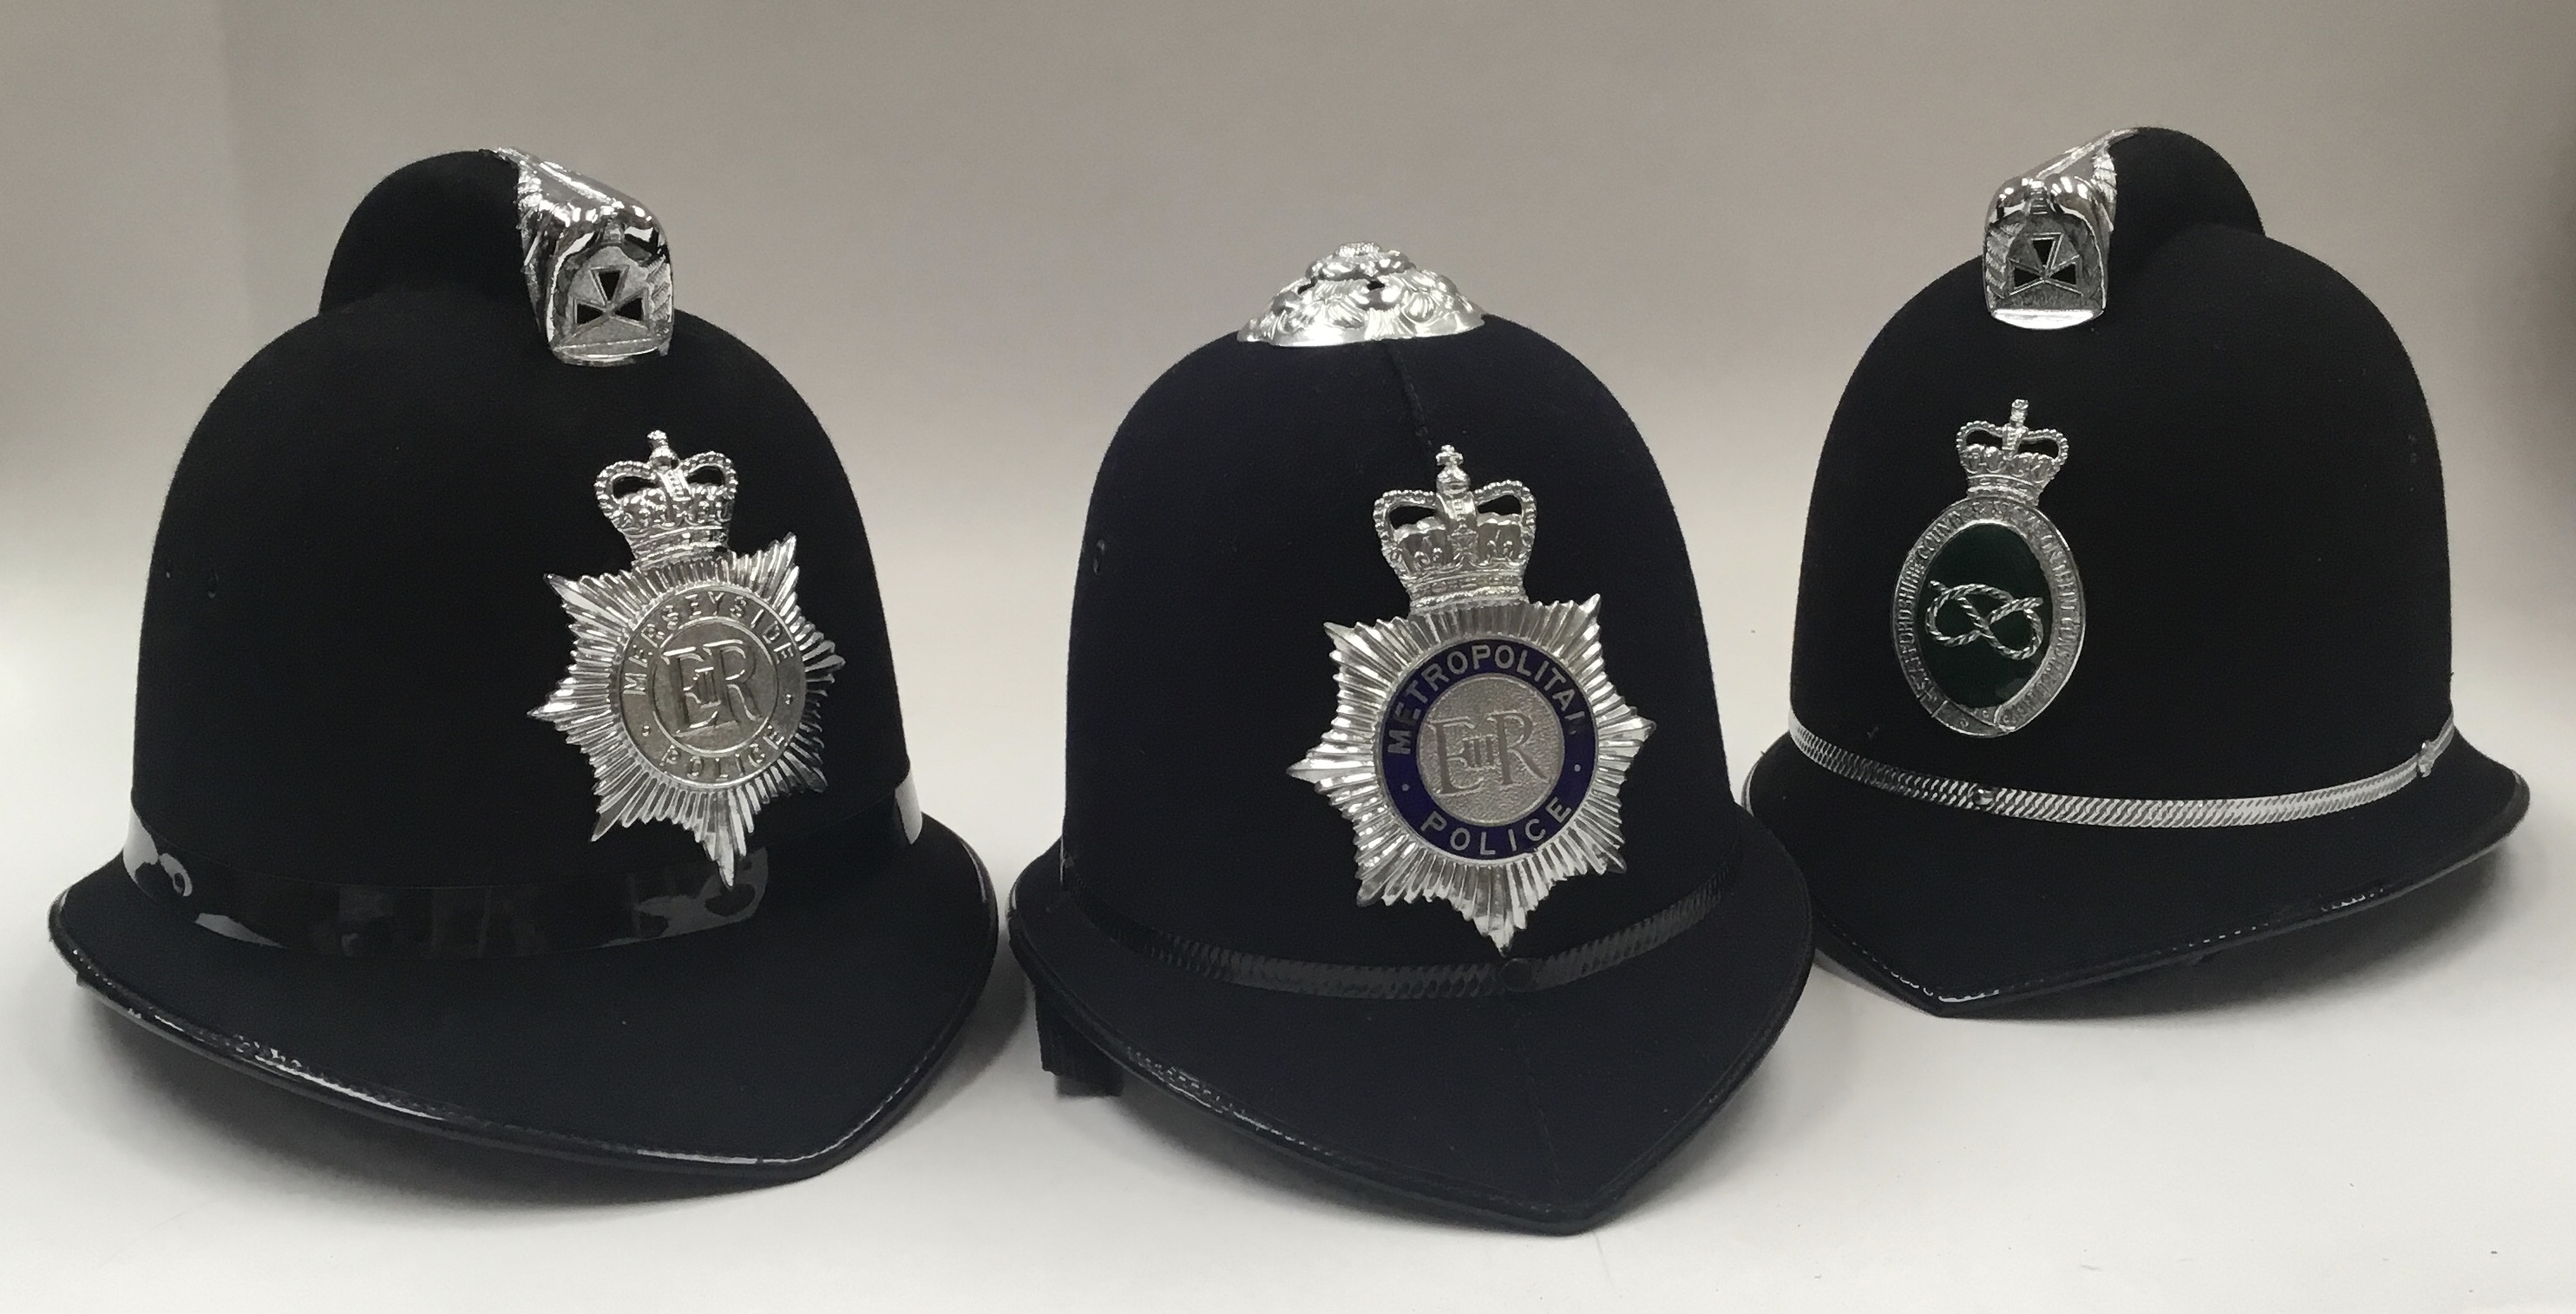 3 vintage British Police helmets, each with chromed badges applied to the fronts. To include: a